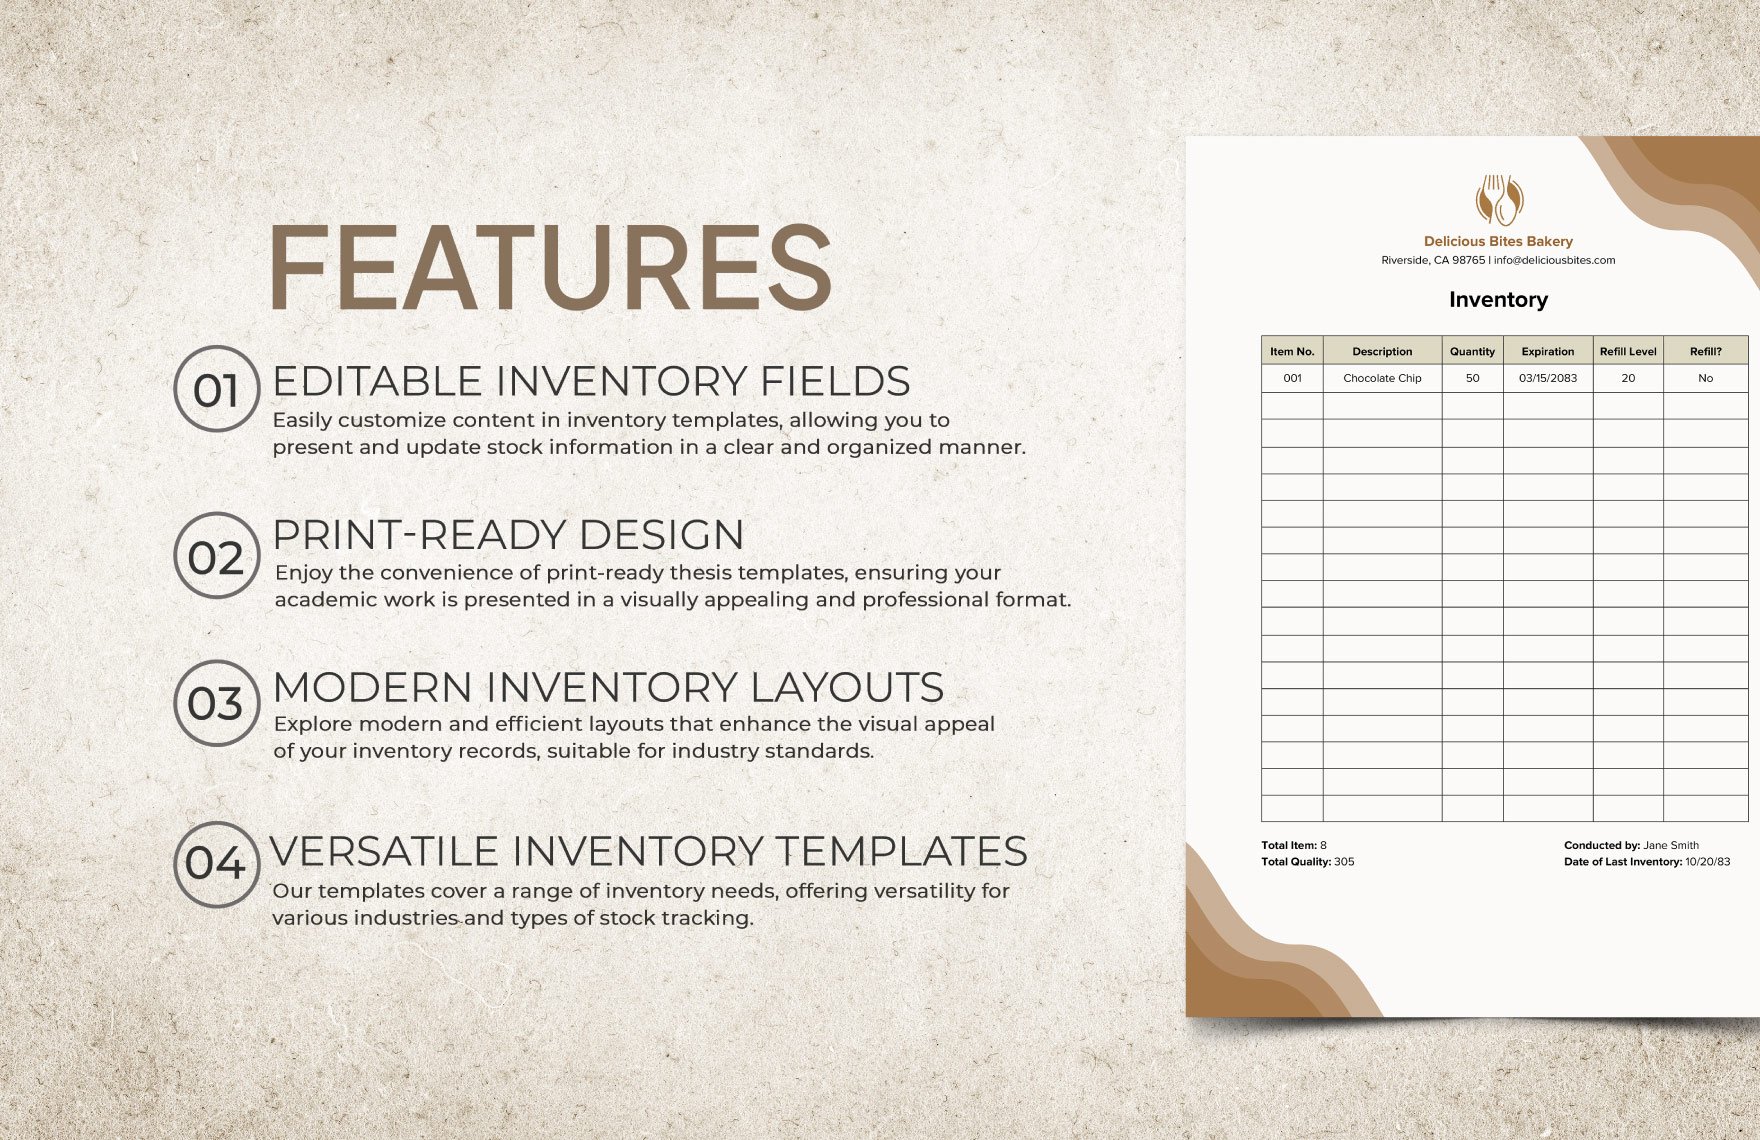 Sample Inventory Template